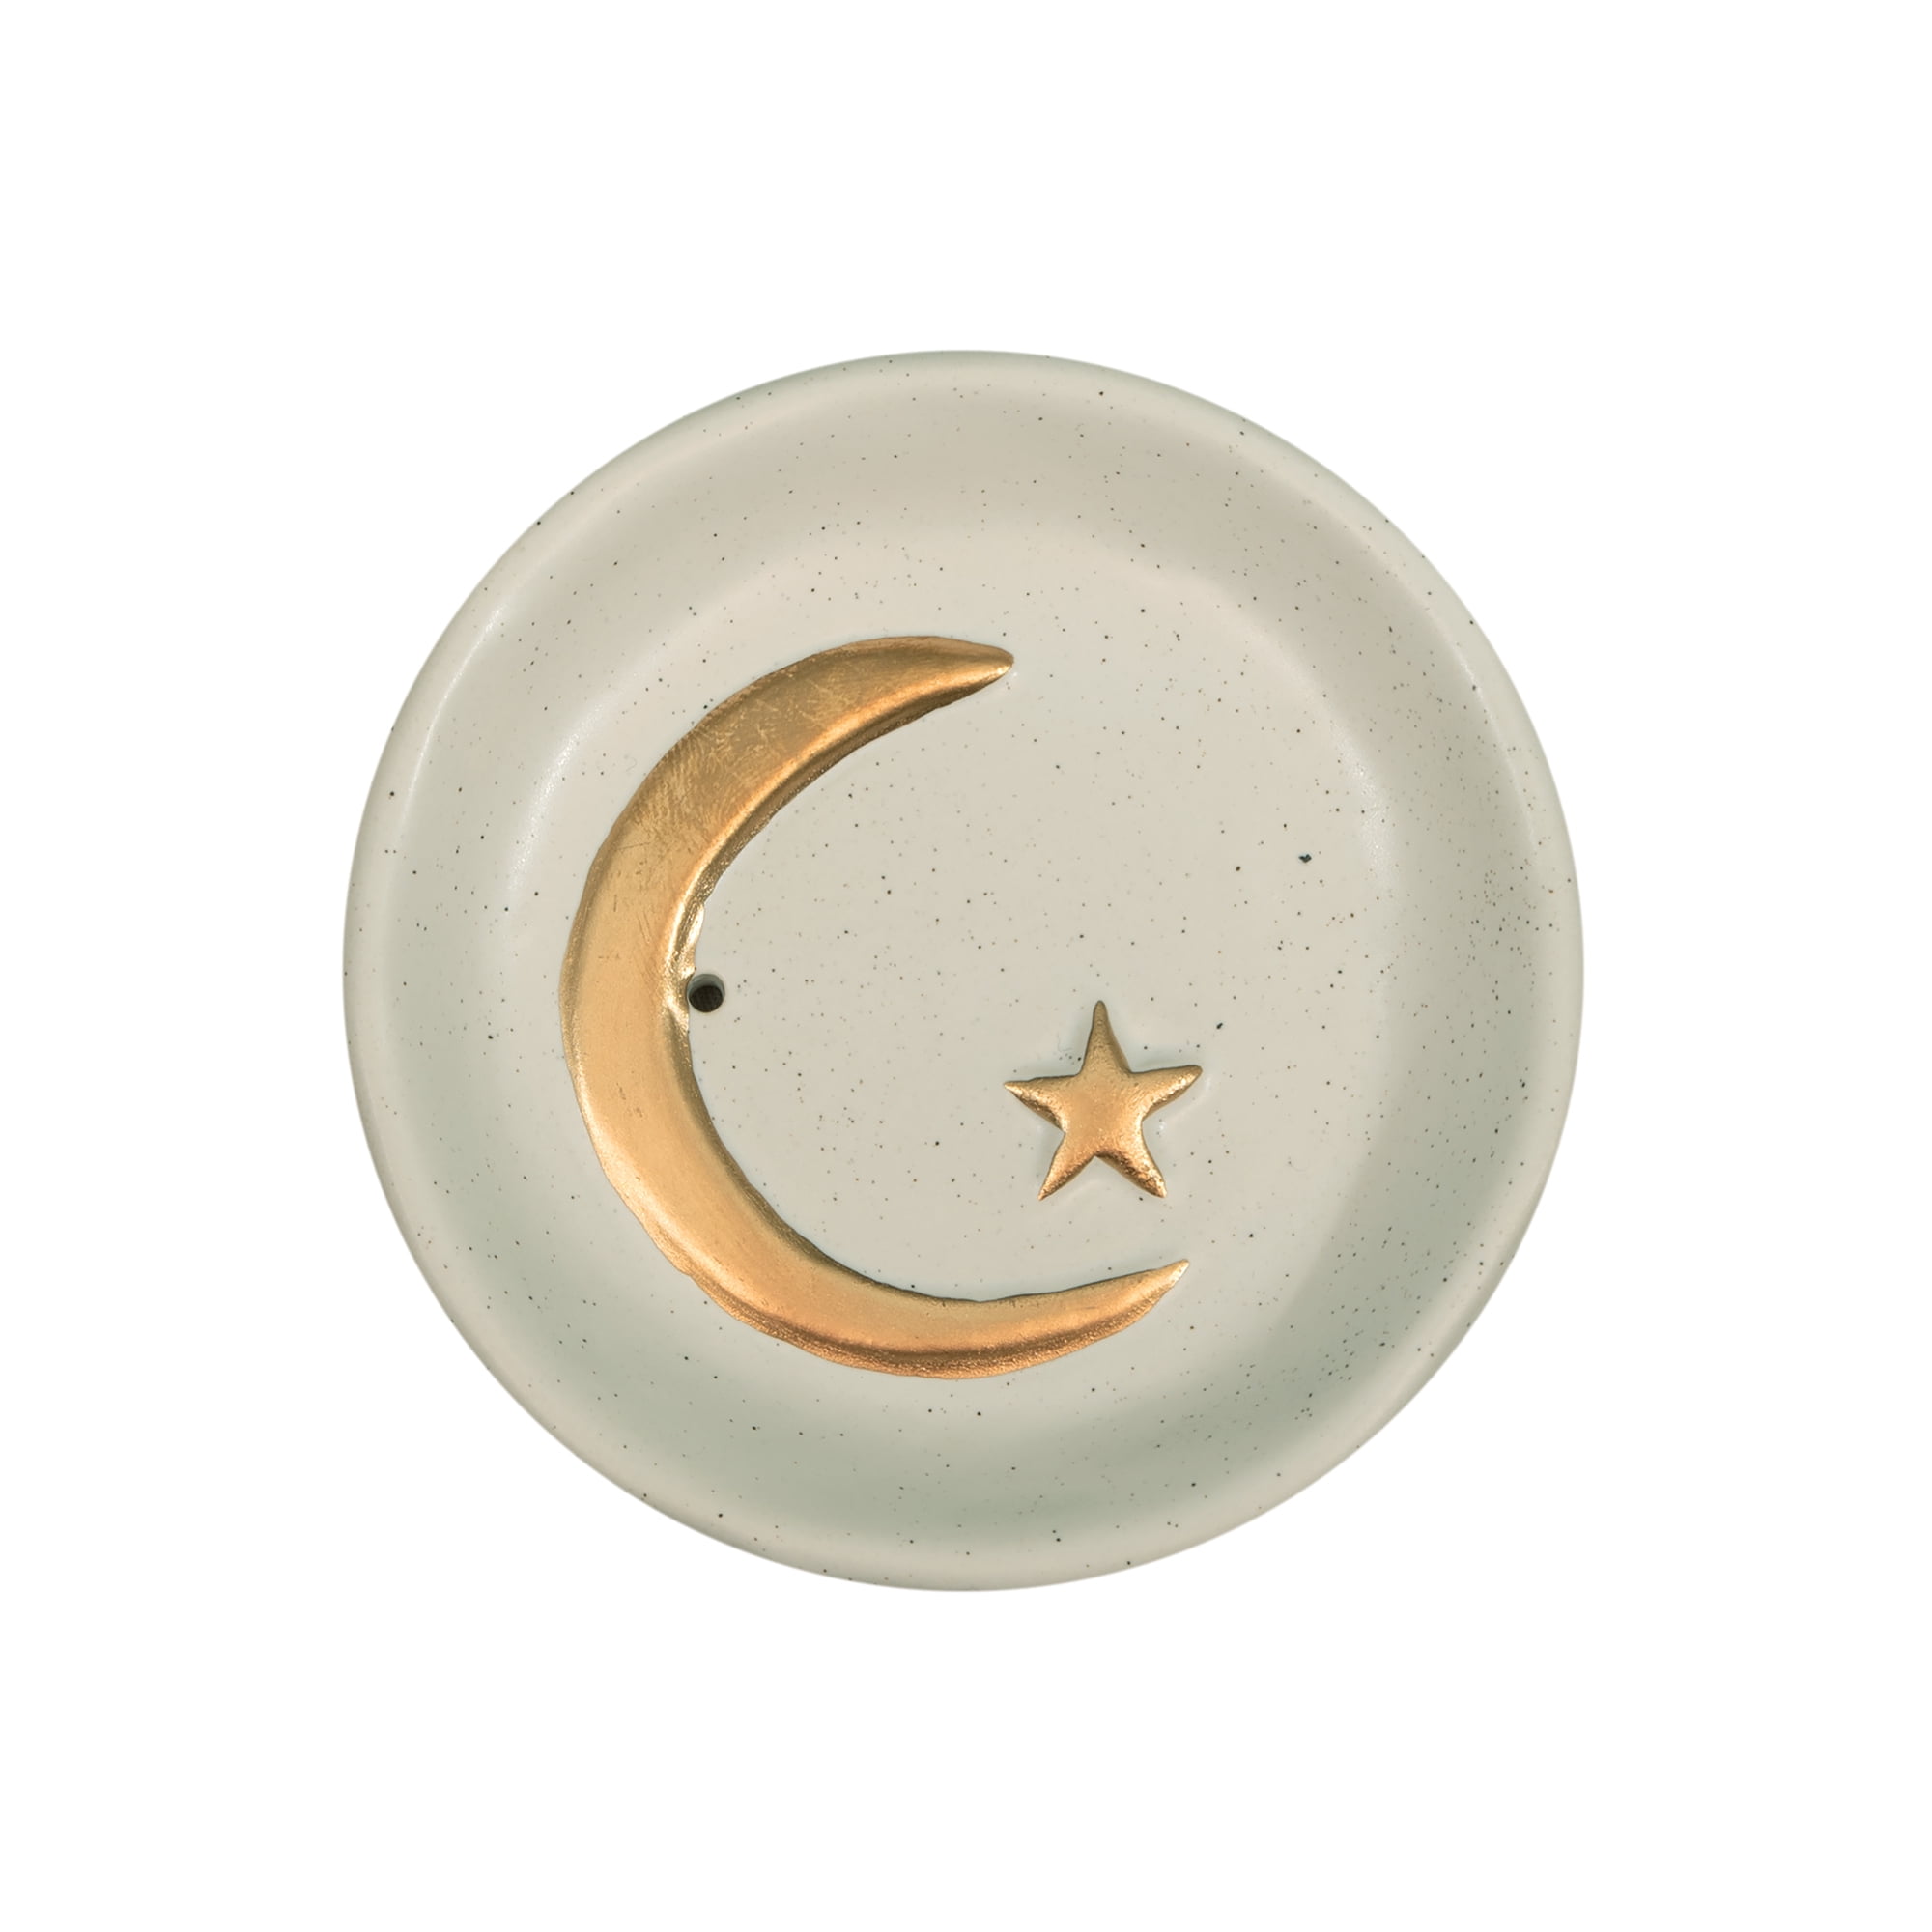 Innozen Ceramic Star And Moon Incense Holder With Black Particle